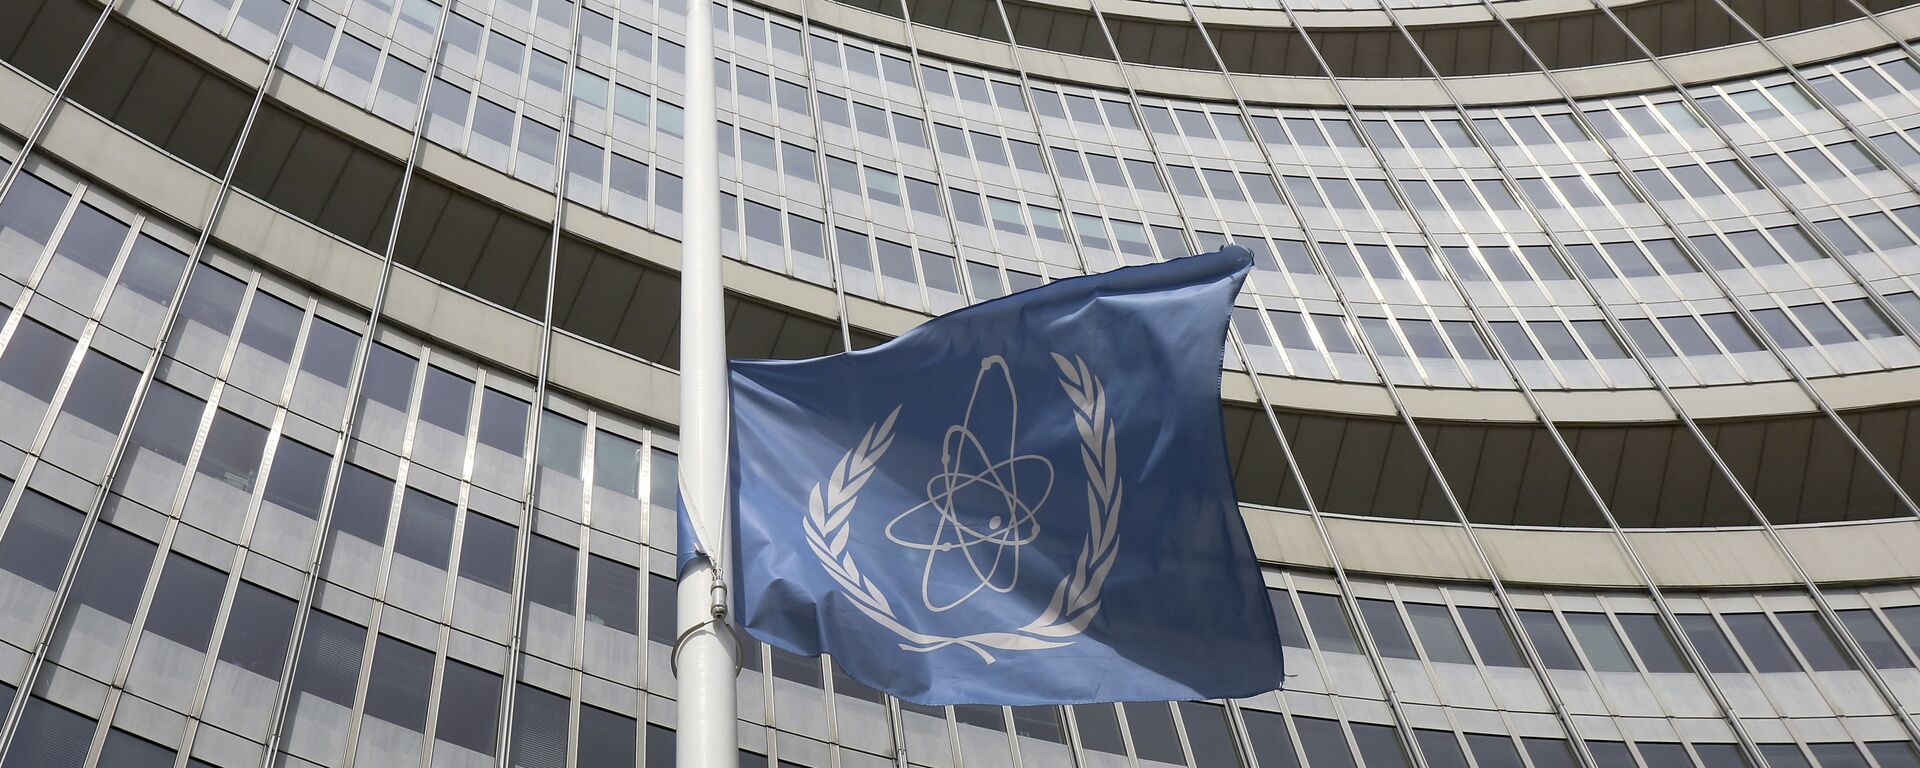 A flag is set to half mast in front of the International Atomic Energy Agency (IAEA) building in Vienna, Austria, Monday, July 22, 2019. - Sputnik International, 1920, 25.10.2022